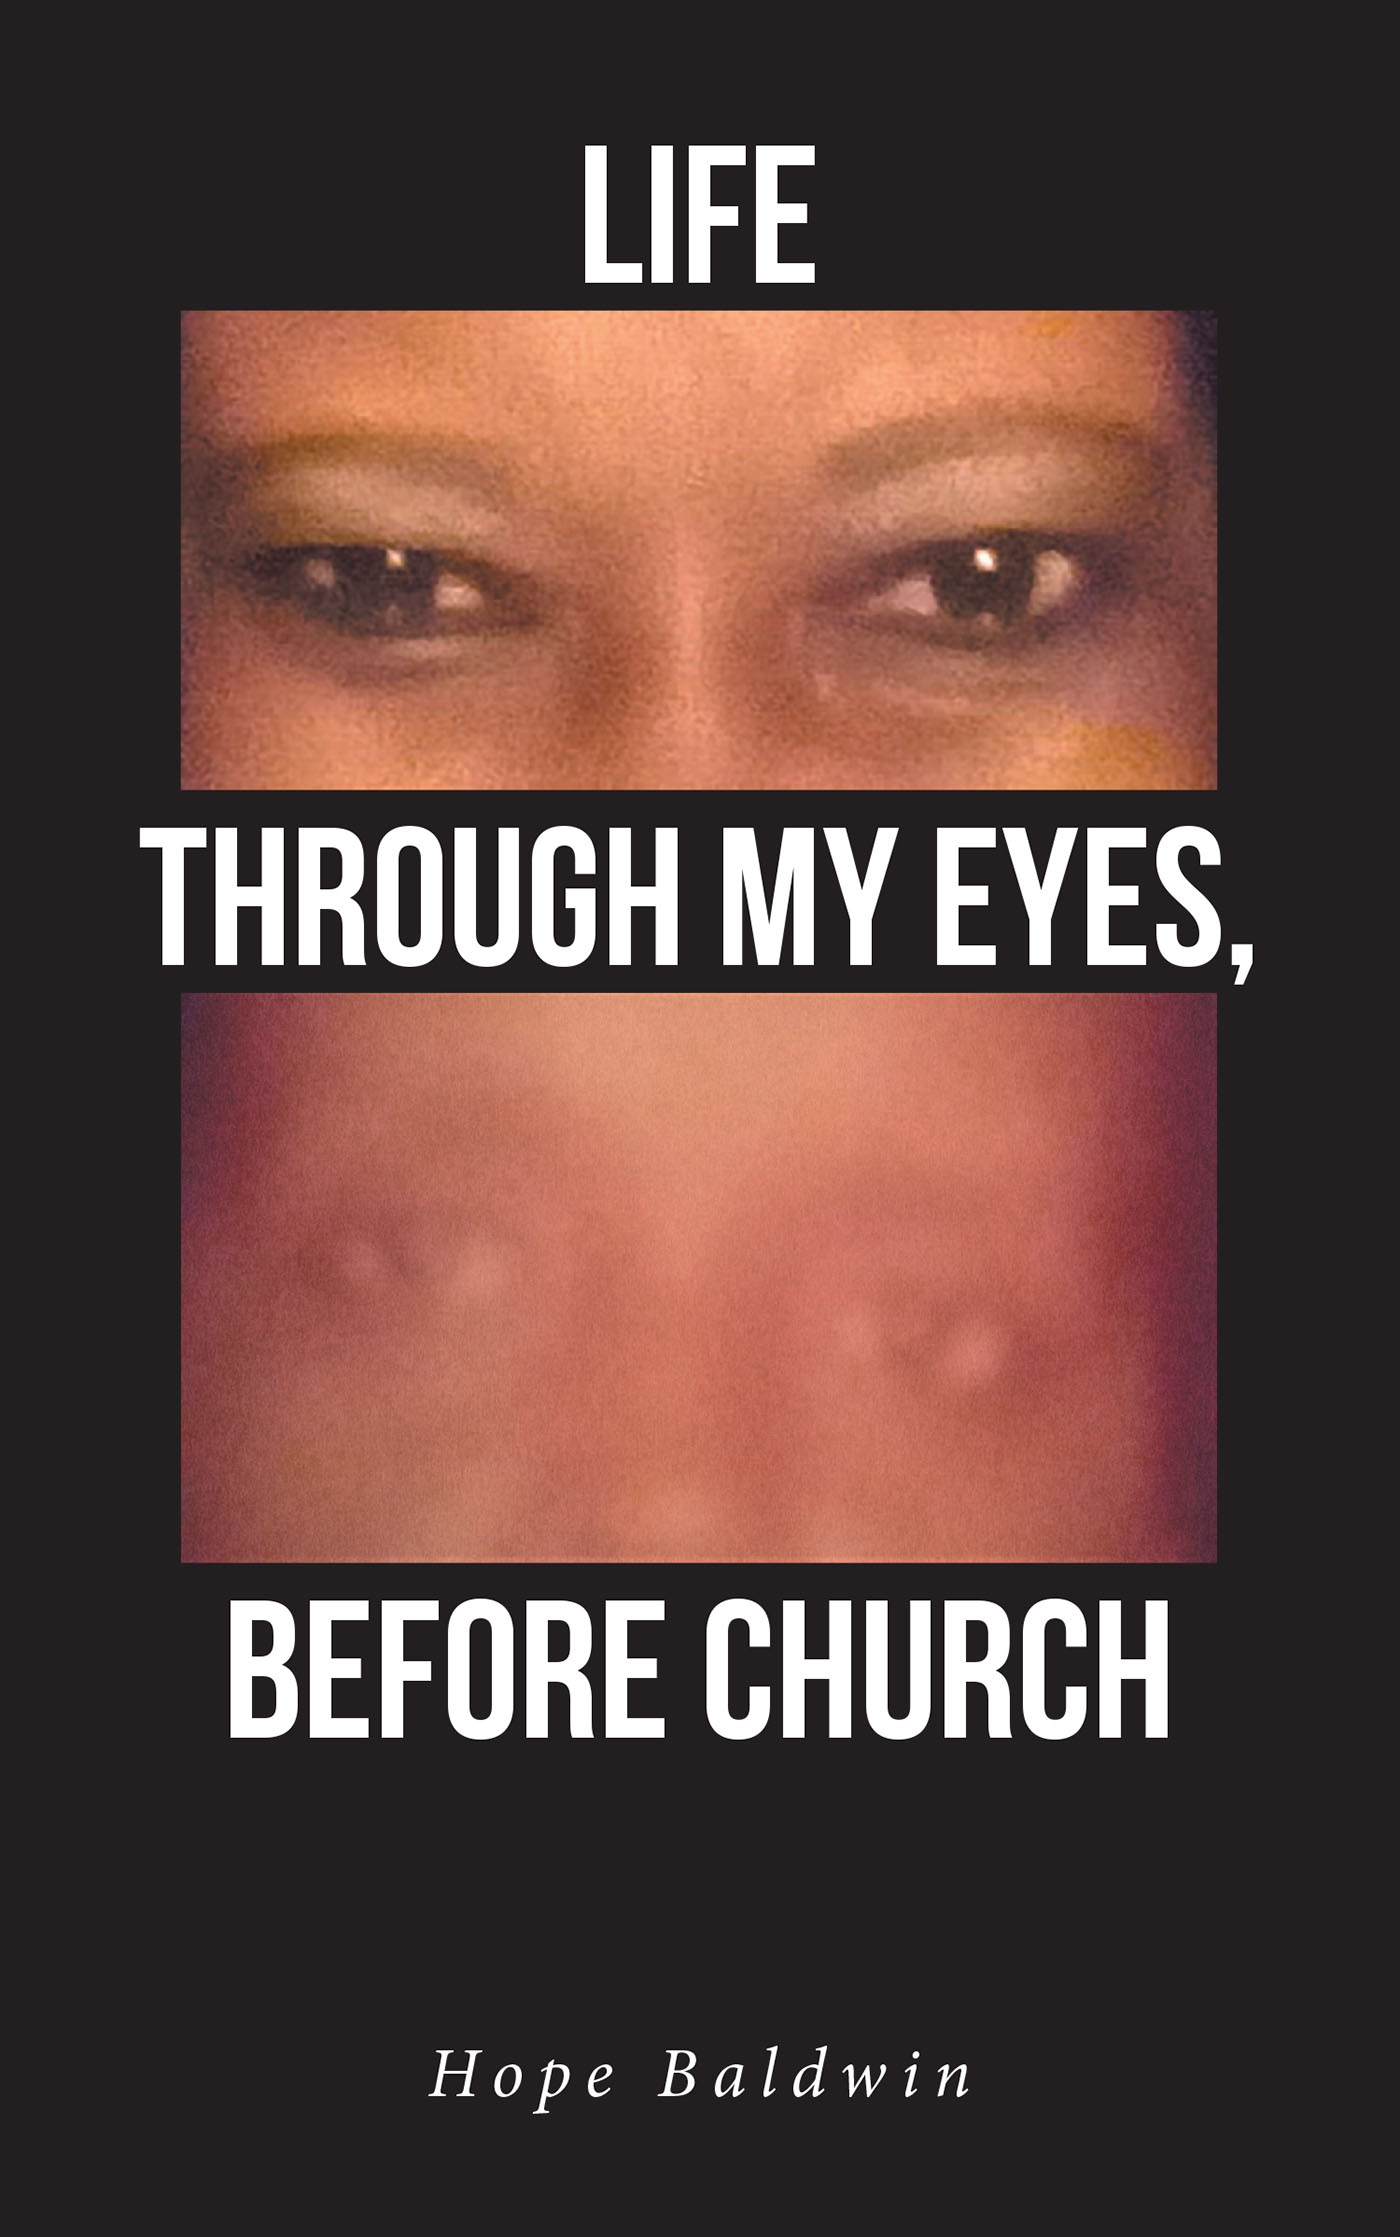 Hope Baldwin’s New Book "Life Through My Eyes, Before Church" is a Heartfelt Collection of Poems That Lay Out a Possible Plan on How to Ease One’s Way to a Peace of Mind